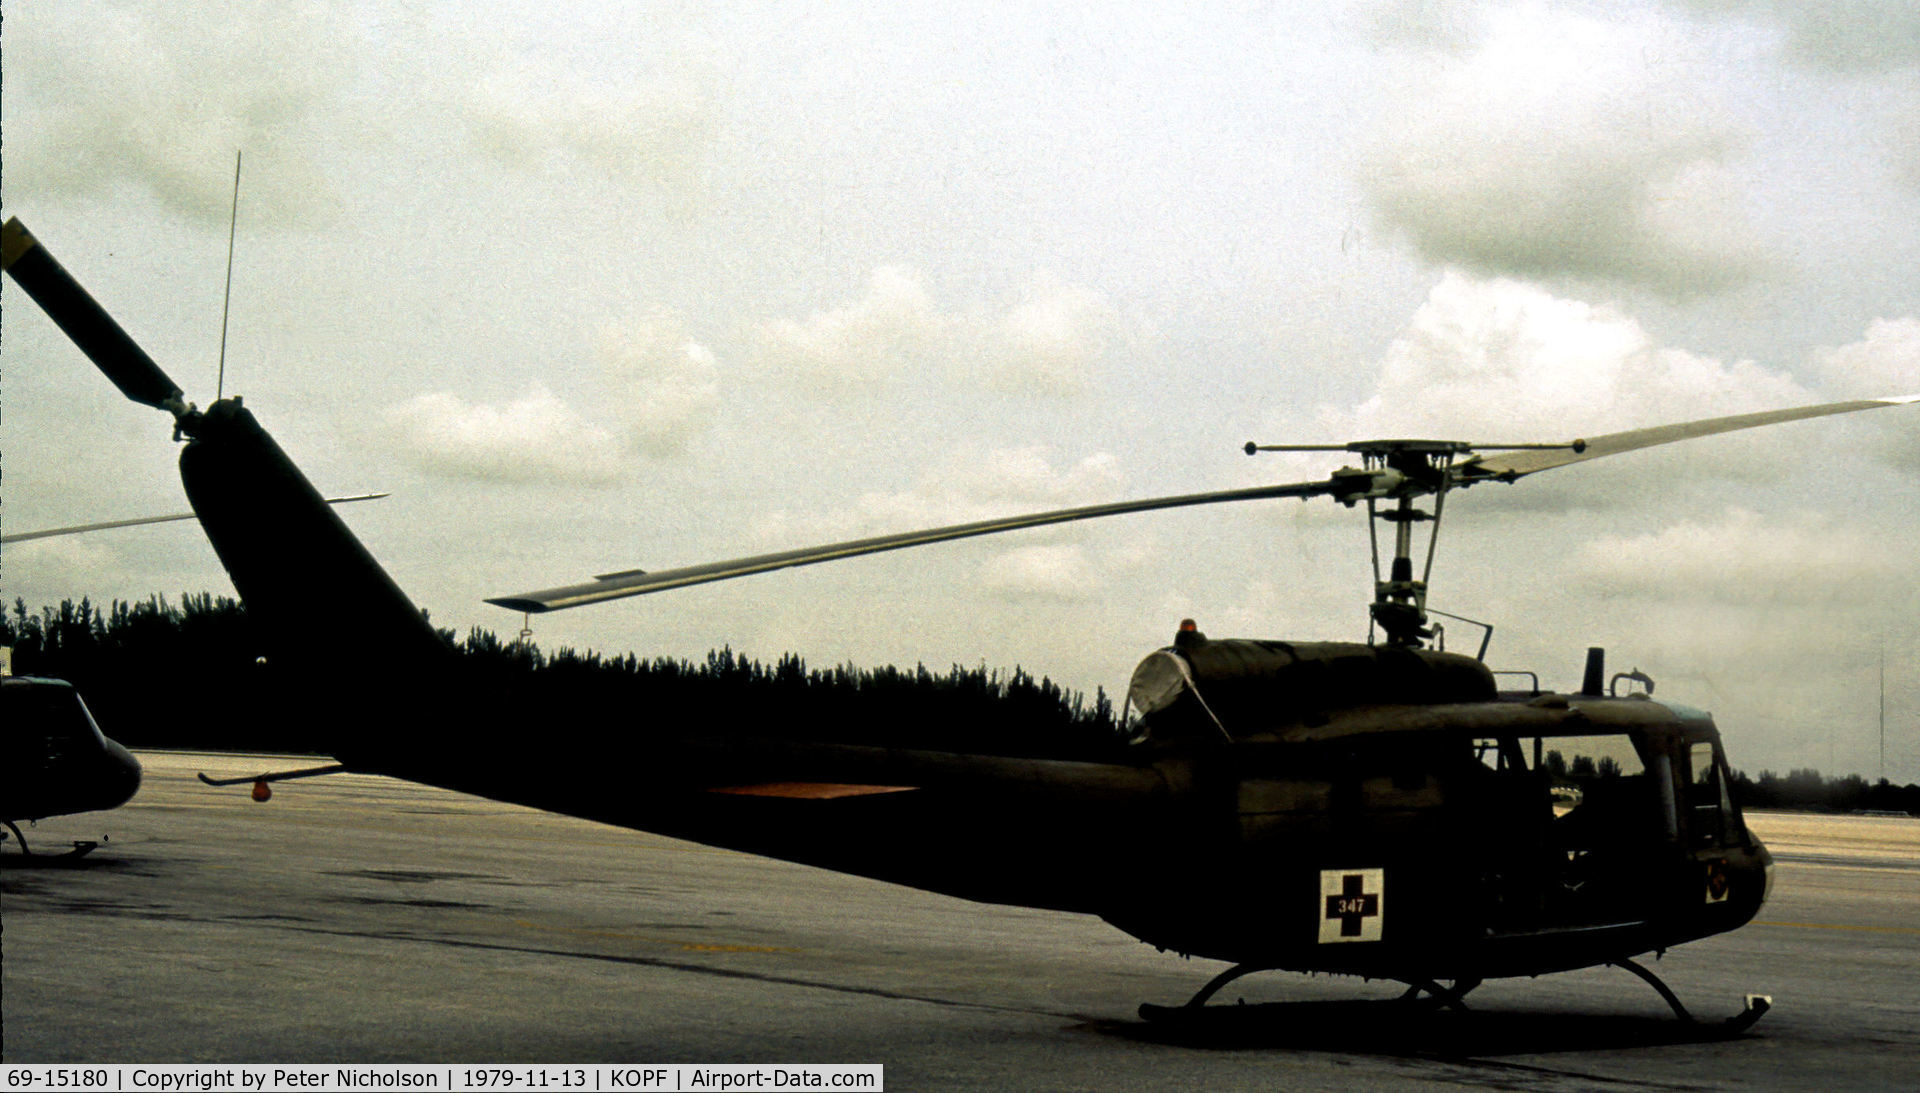 69-15180, 1969 Bell UH-1H Iroquois C/N 11468, UH-1H Iroquois of 347th Medical Detachment on the ramp at Opa Locka in November 1979.